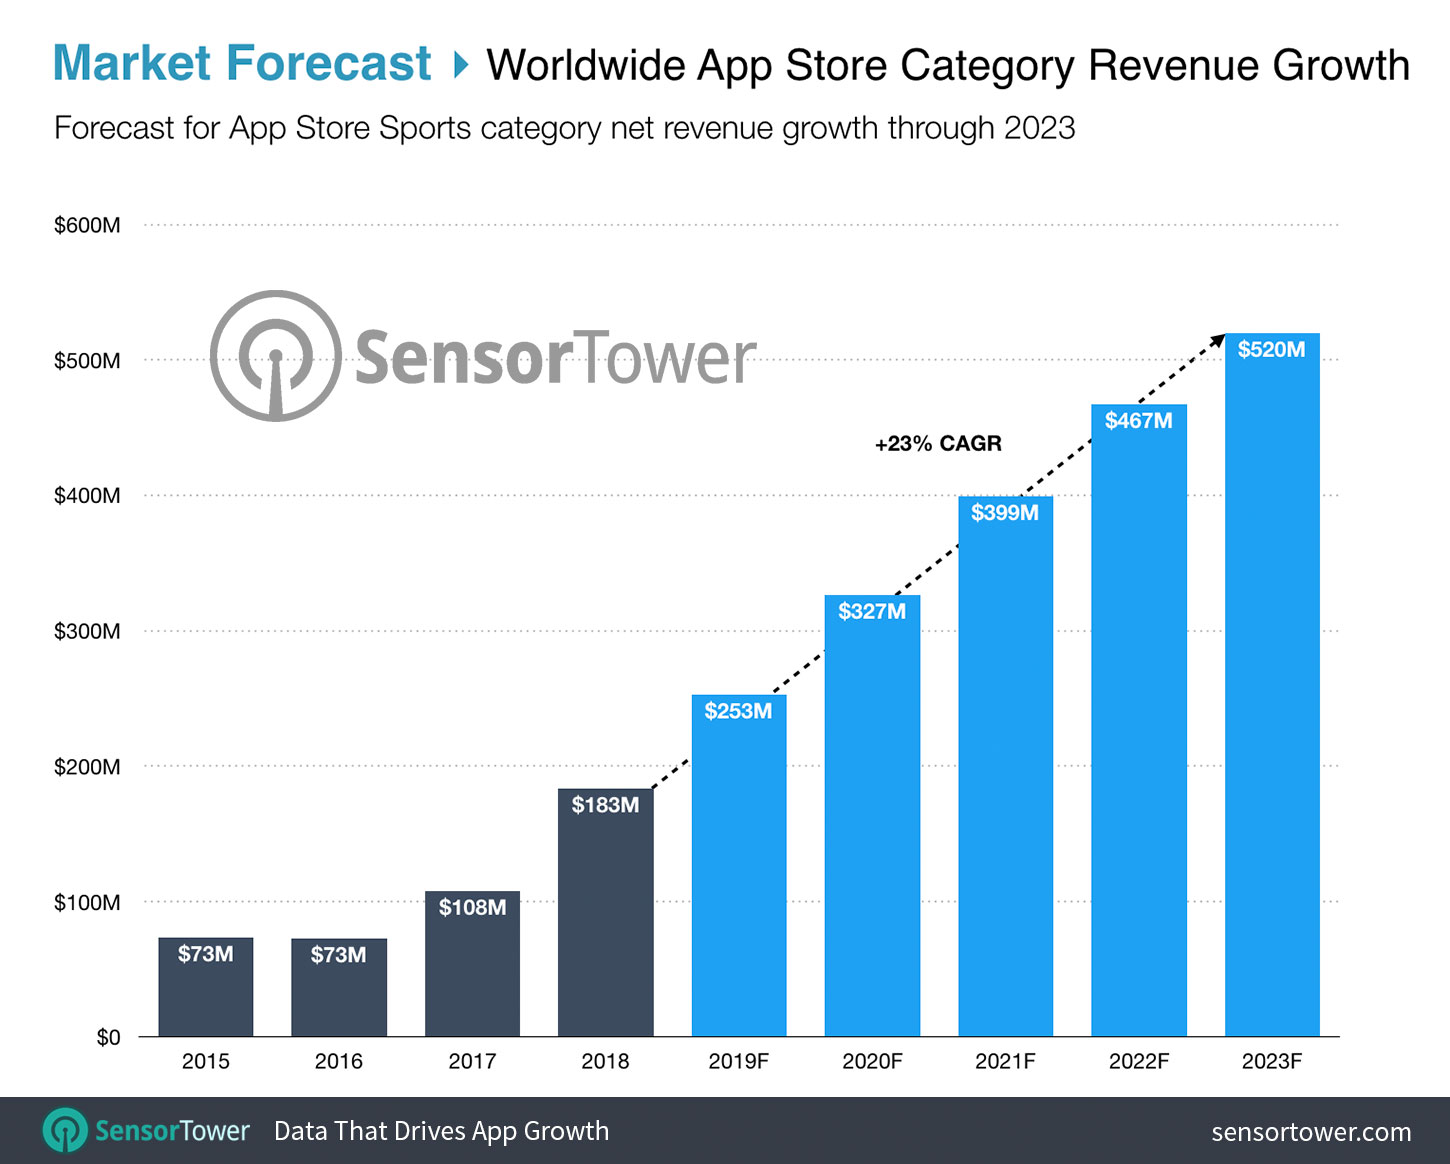 Worldwide Sports Revenue Growth Forecast Chart for the App Store